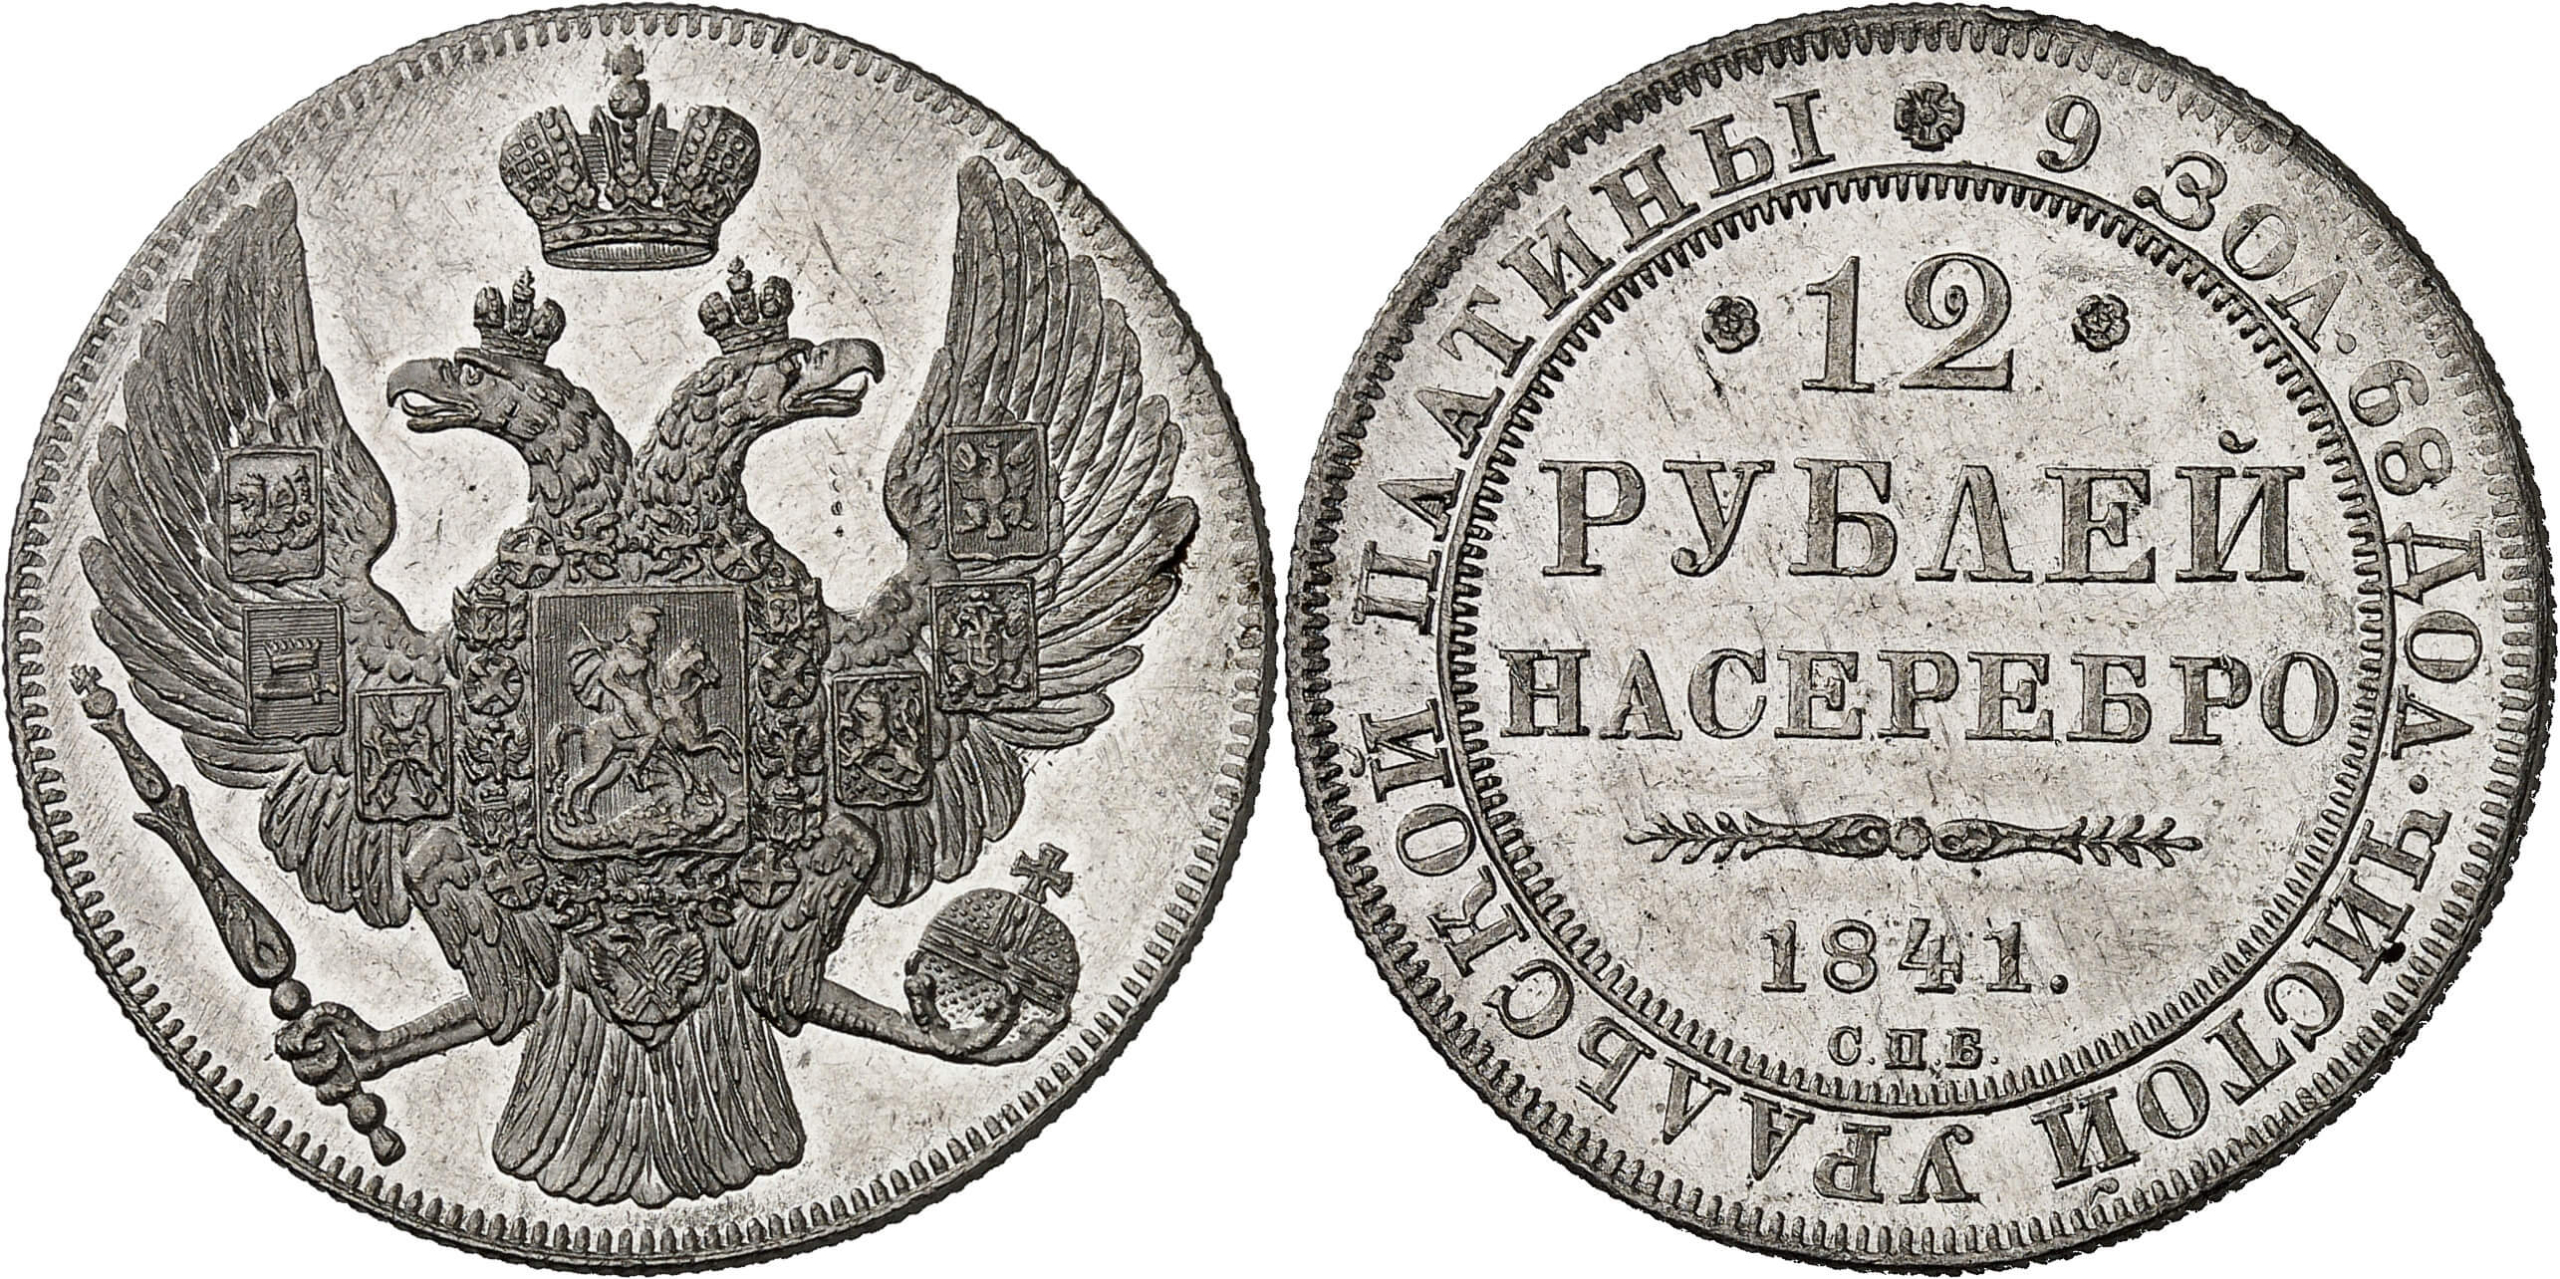 No. 458. Russia. Nicholas I, 1825-1855. 12 roubles, platinum, 1841, St. Petersburg. Only 75 specimens minted. From the Maître Robert Schuman Collection. Estimate: 50,000 euros. Hammer price: 220,000 euros.